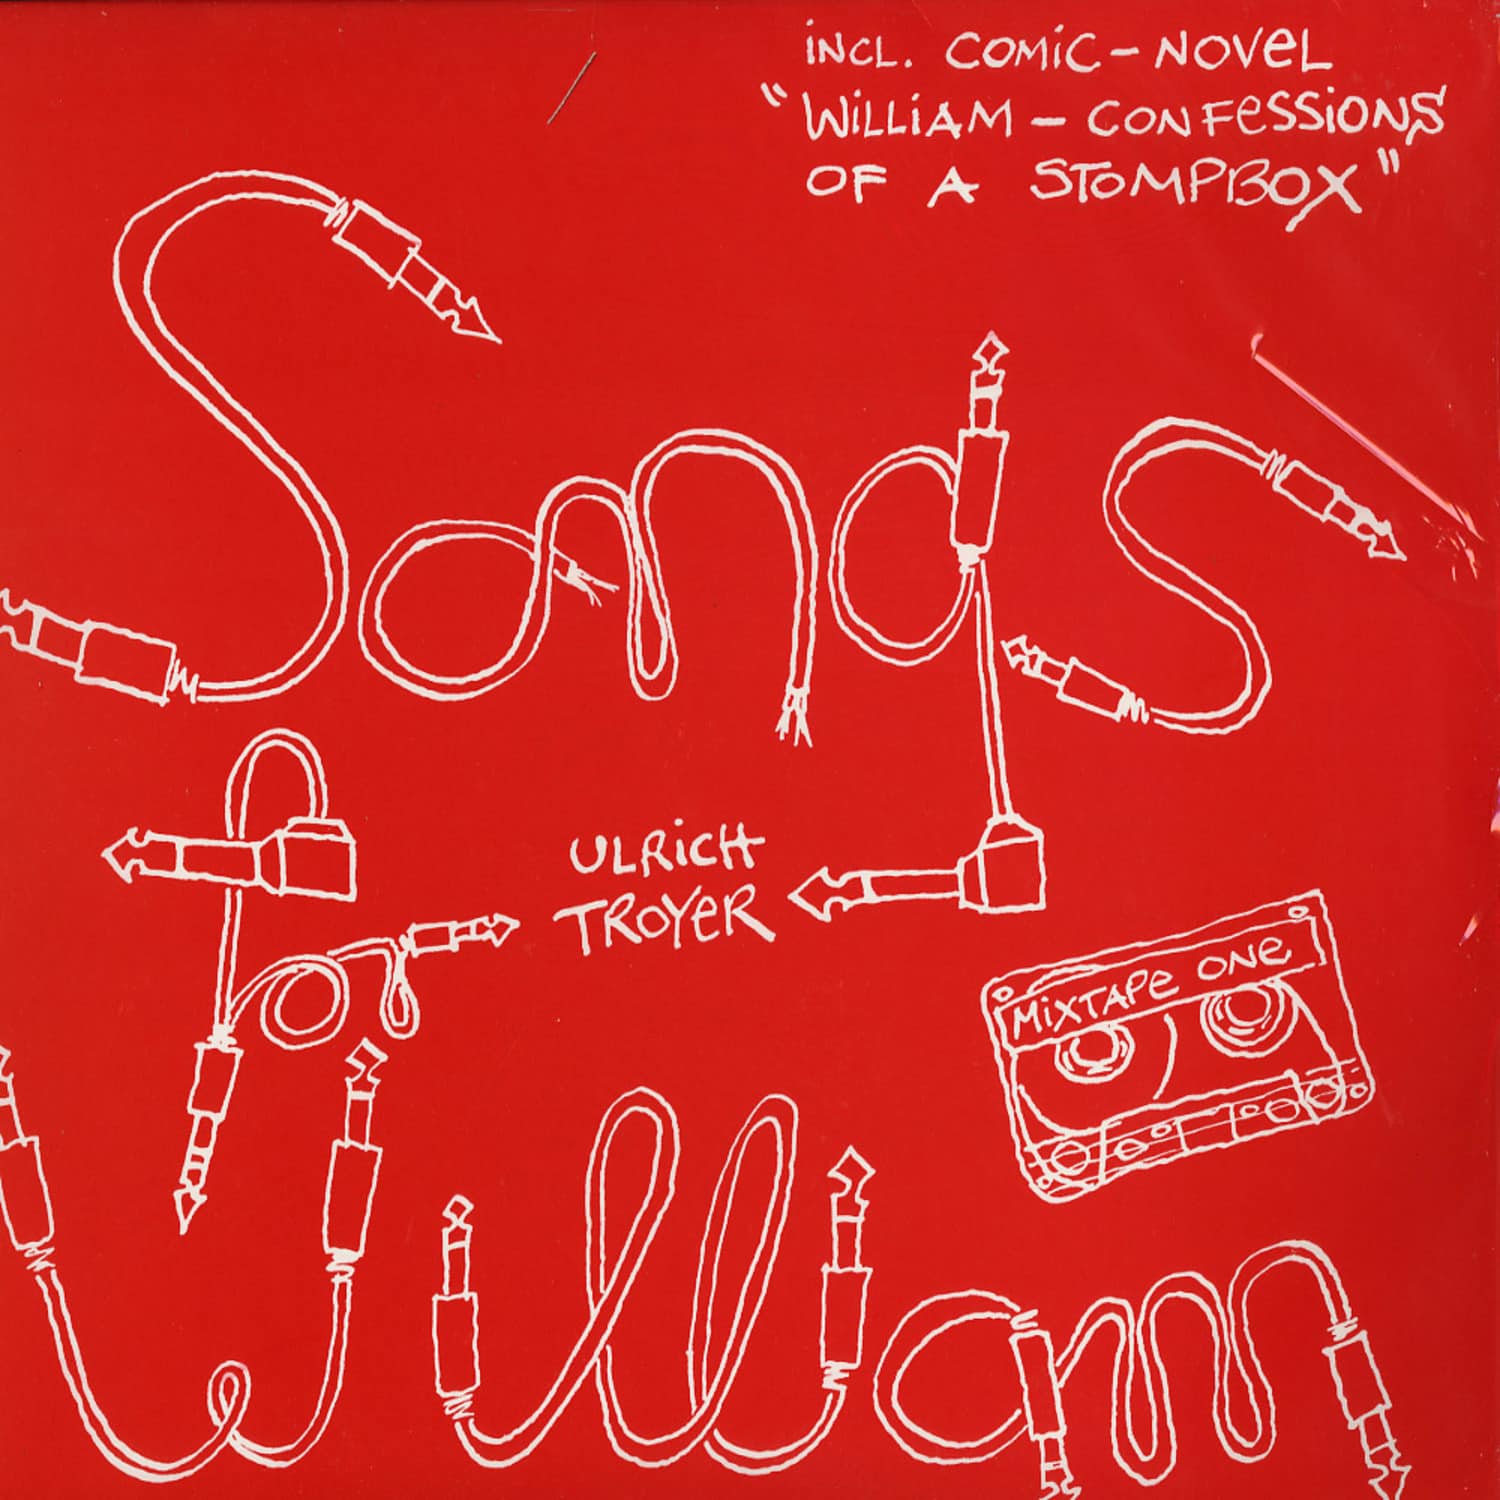 Ulrich Troyer - SONGS FOR WILLIAM 